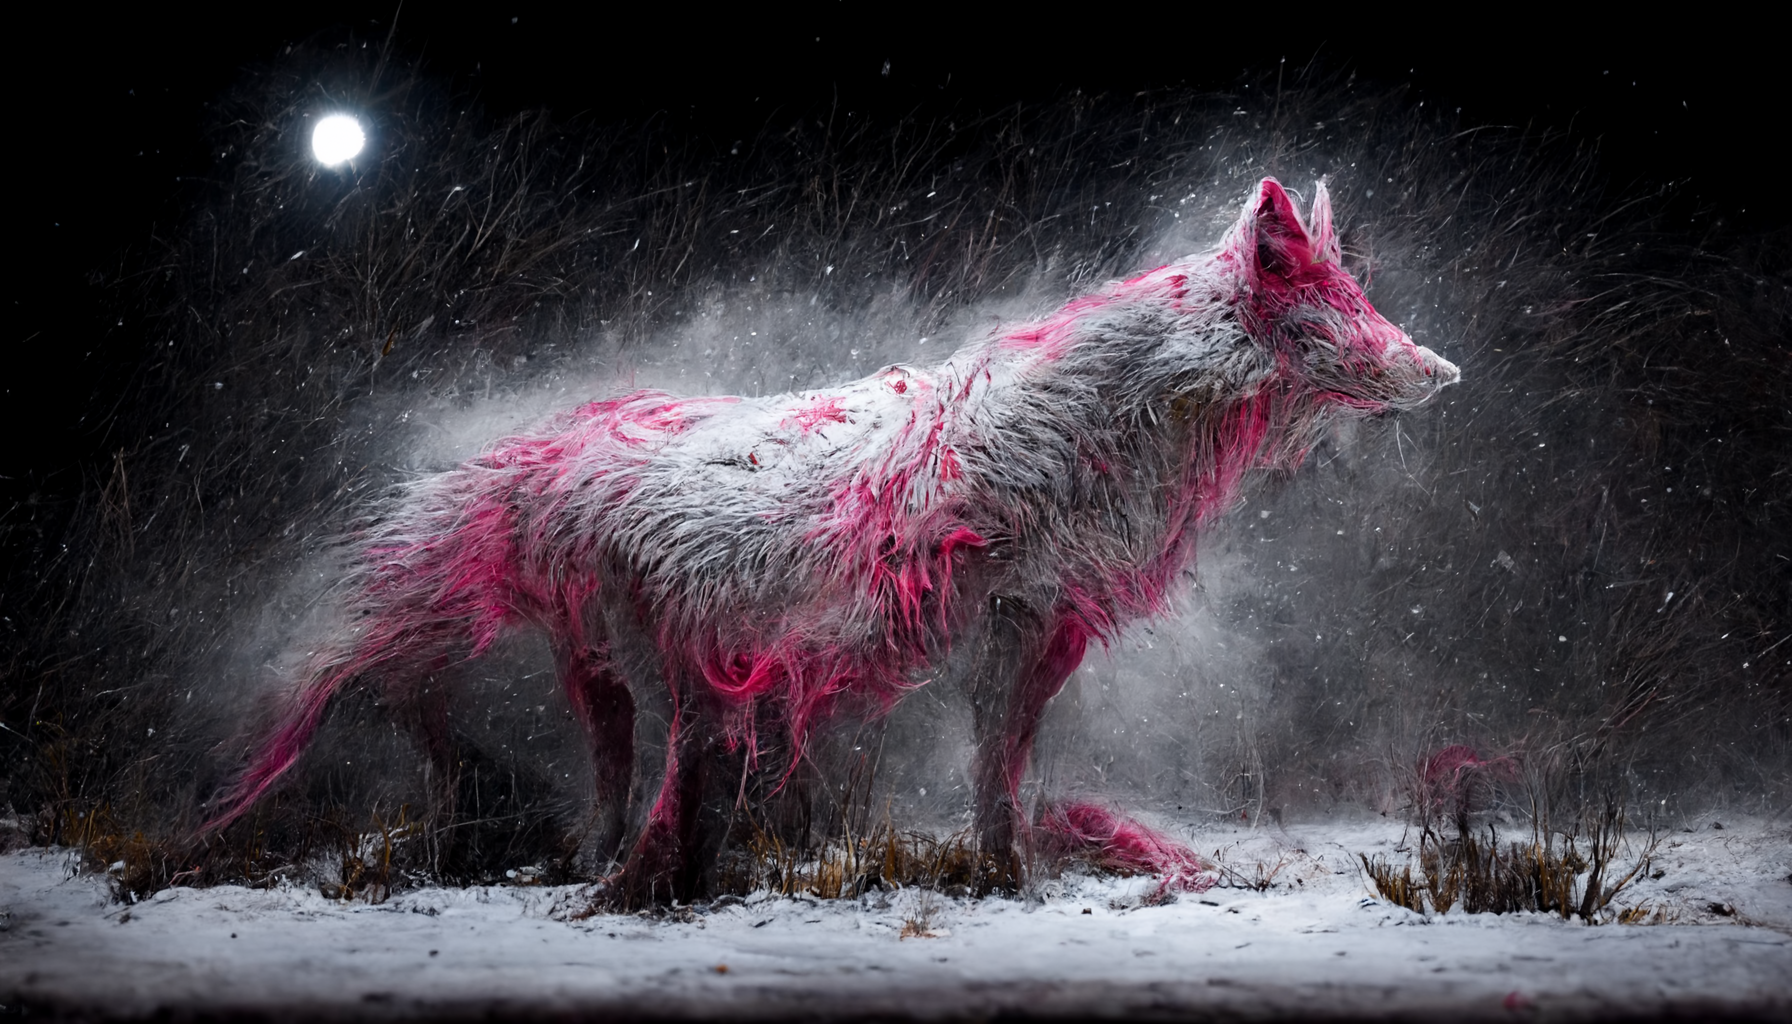 A Pink Wolf In The Middle Of A Snowy Field At Night Pho A8f855ed 1de7 4642 A7c6 Cf2cb037cdd1